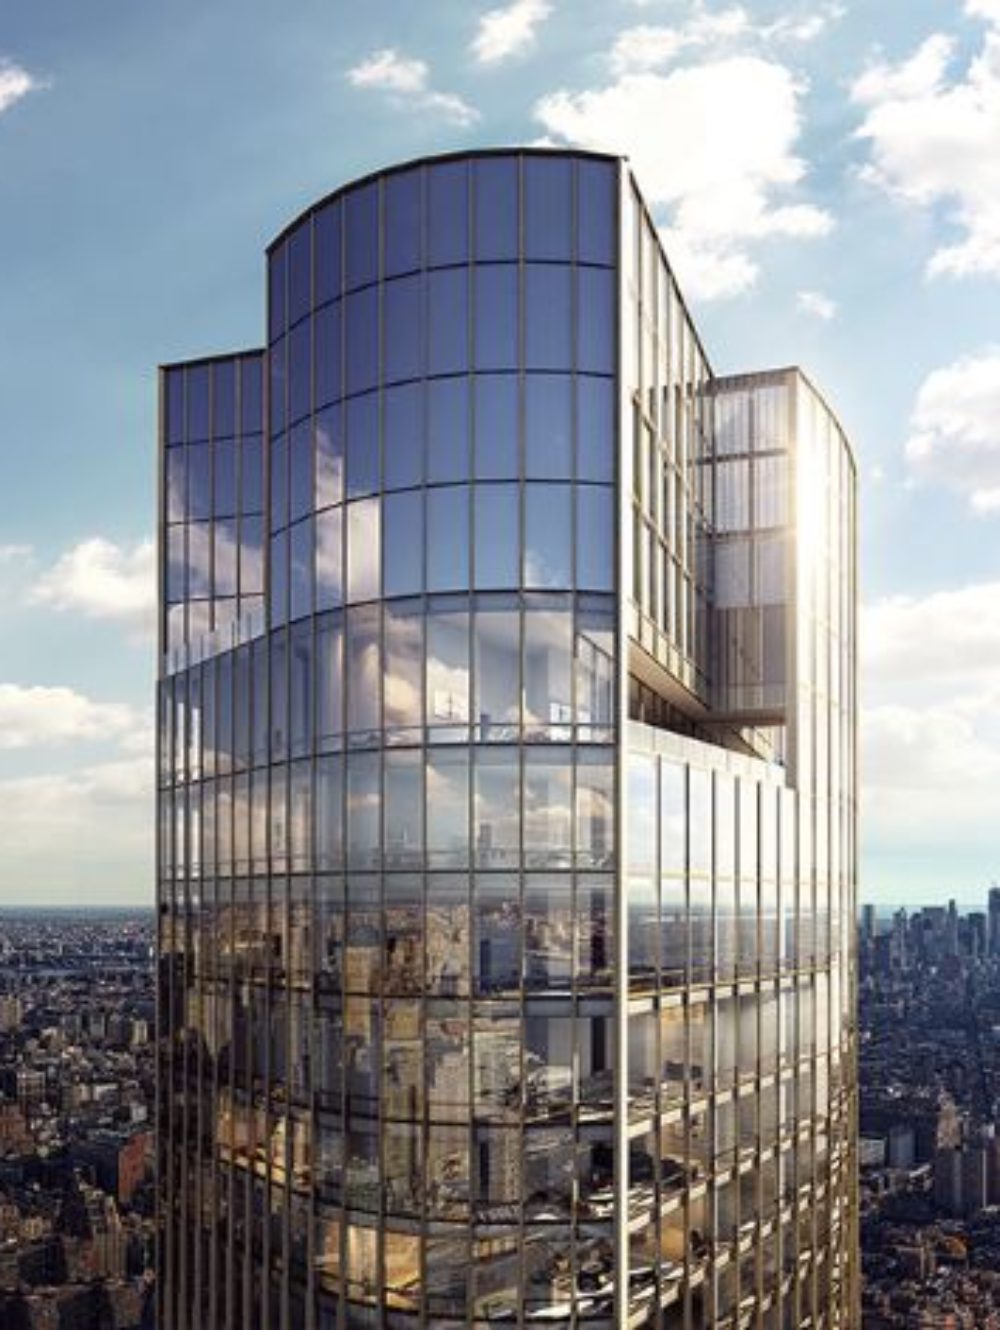 Exterior skyline view of 35 Hudson Yards condominiums in New York City. Includes view of river and NYC during the day.